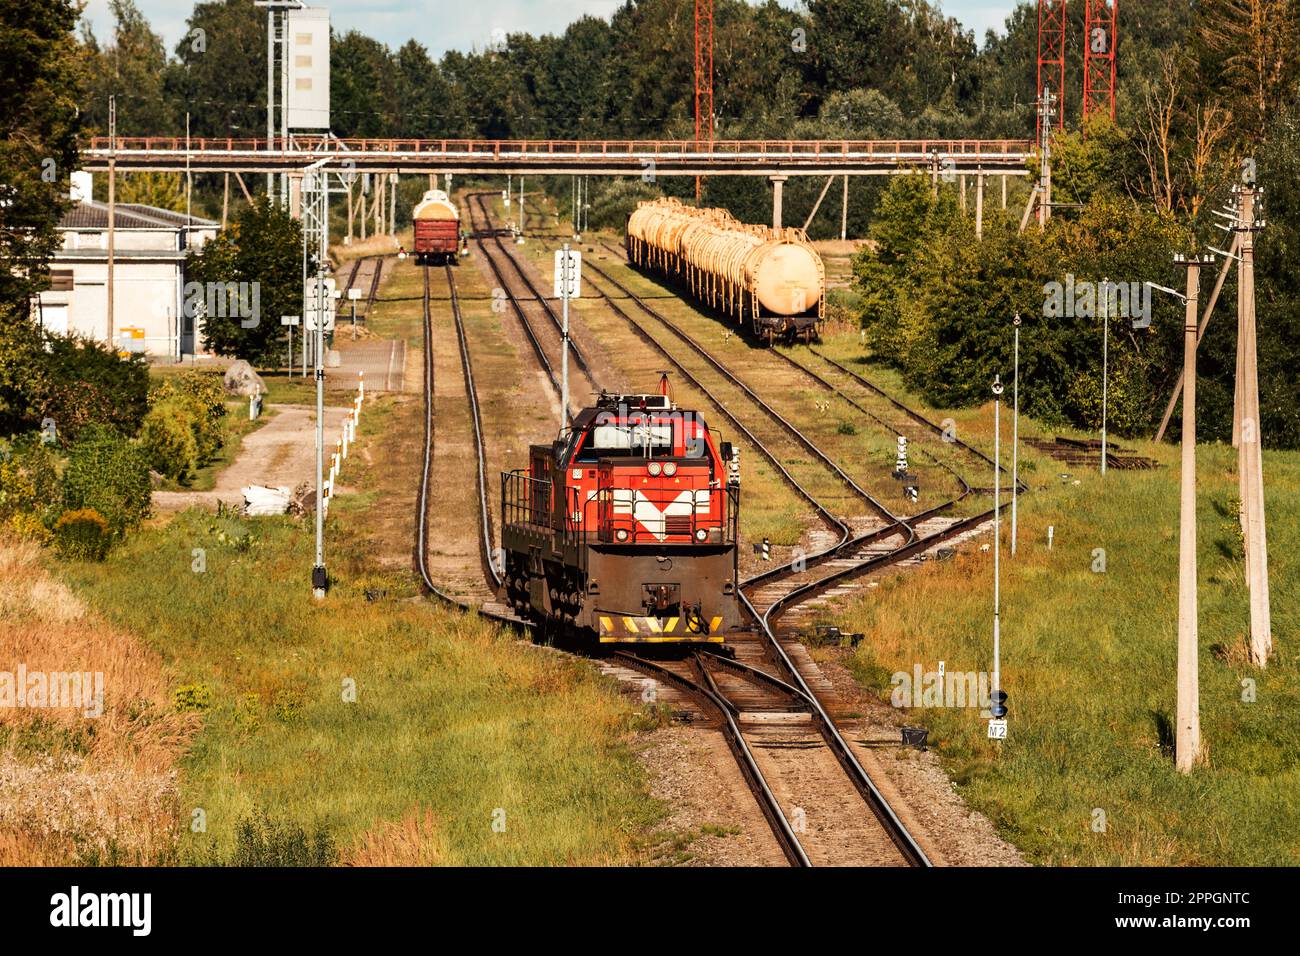 Lone shunting locomotive in red color at marshalling yard Stock Photo